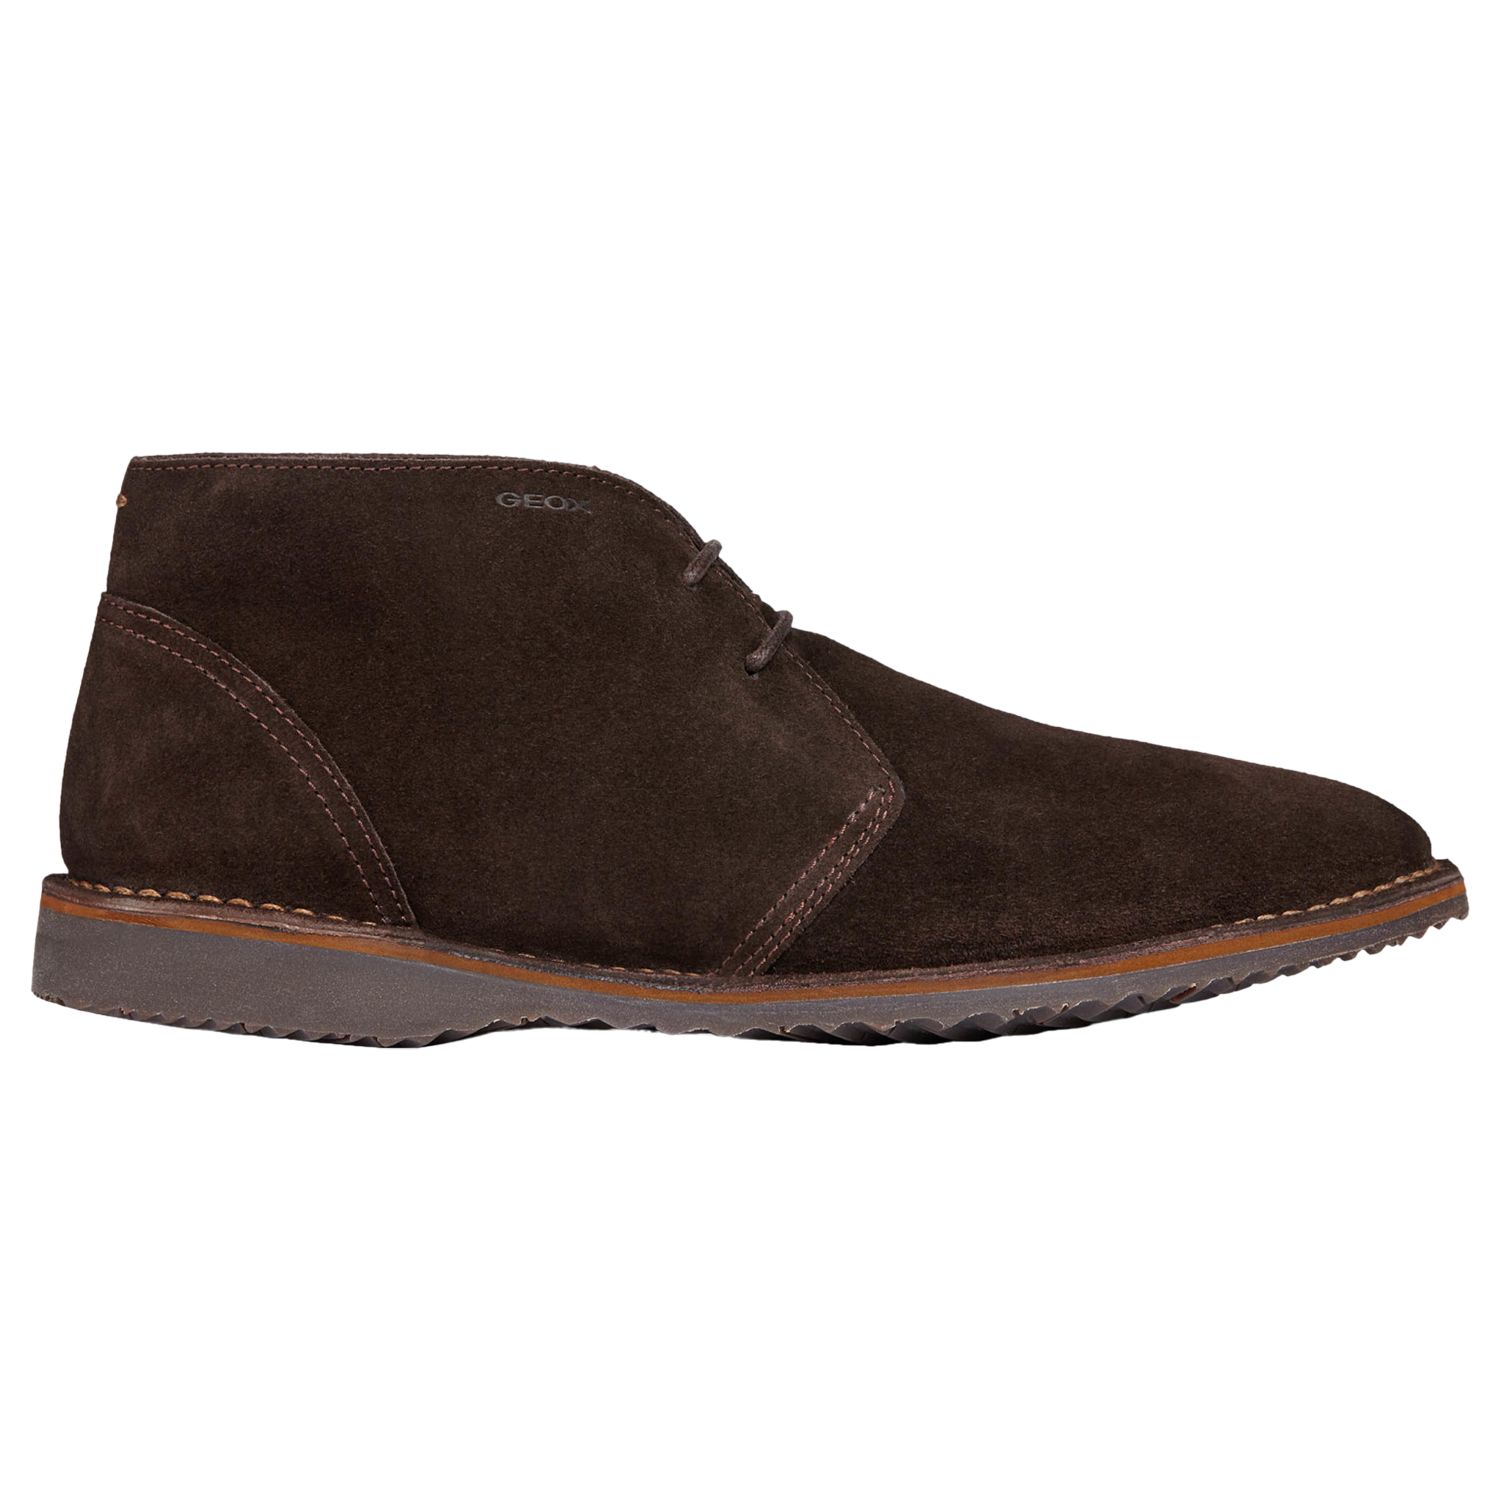 Geox Zal Pebbled Suede Chukka Boots, Brown at John Lewis & Partners